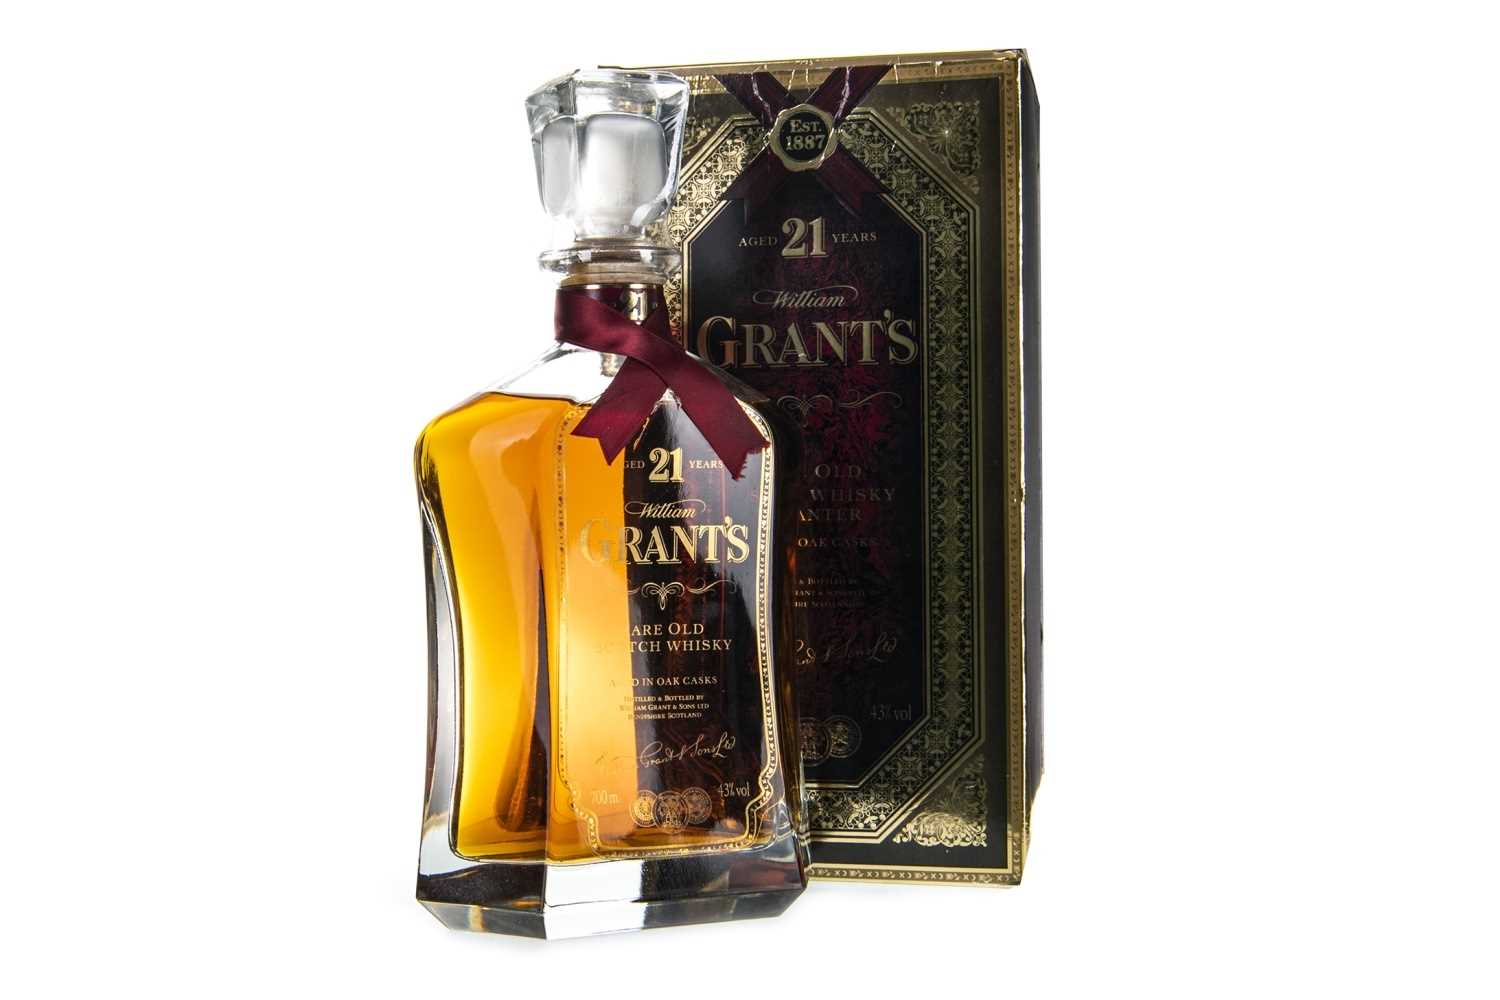 Lot 403 - GRANT'S AGED 21 YEARS